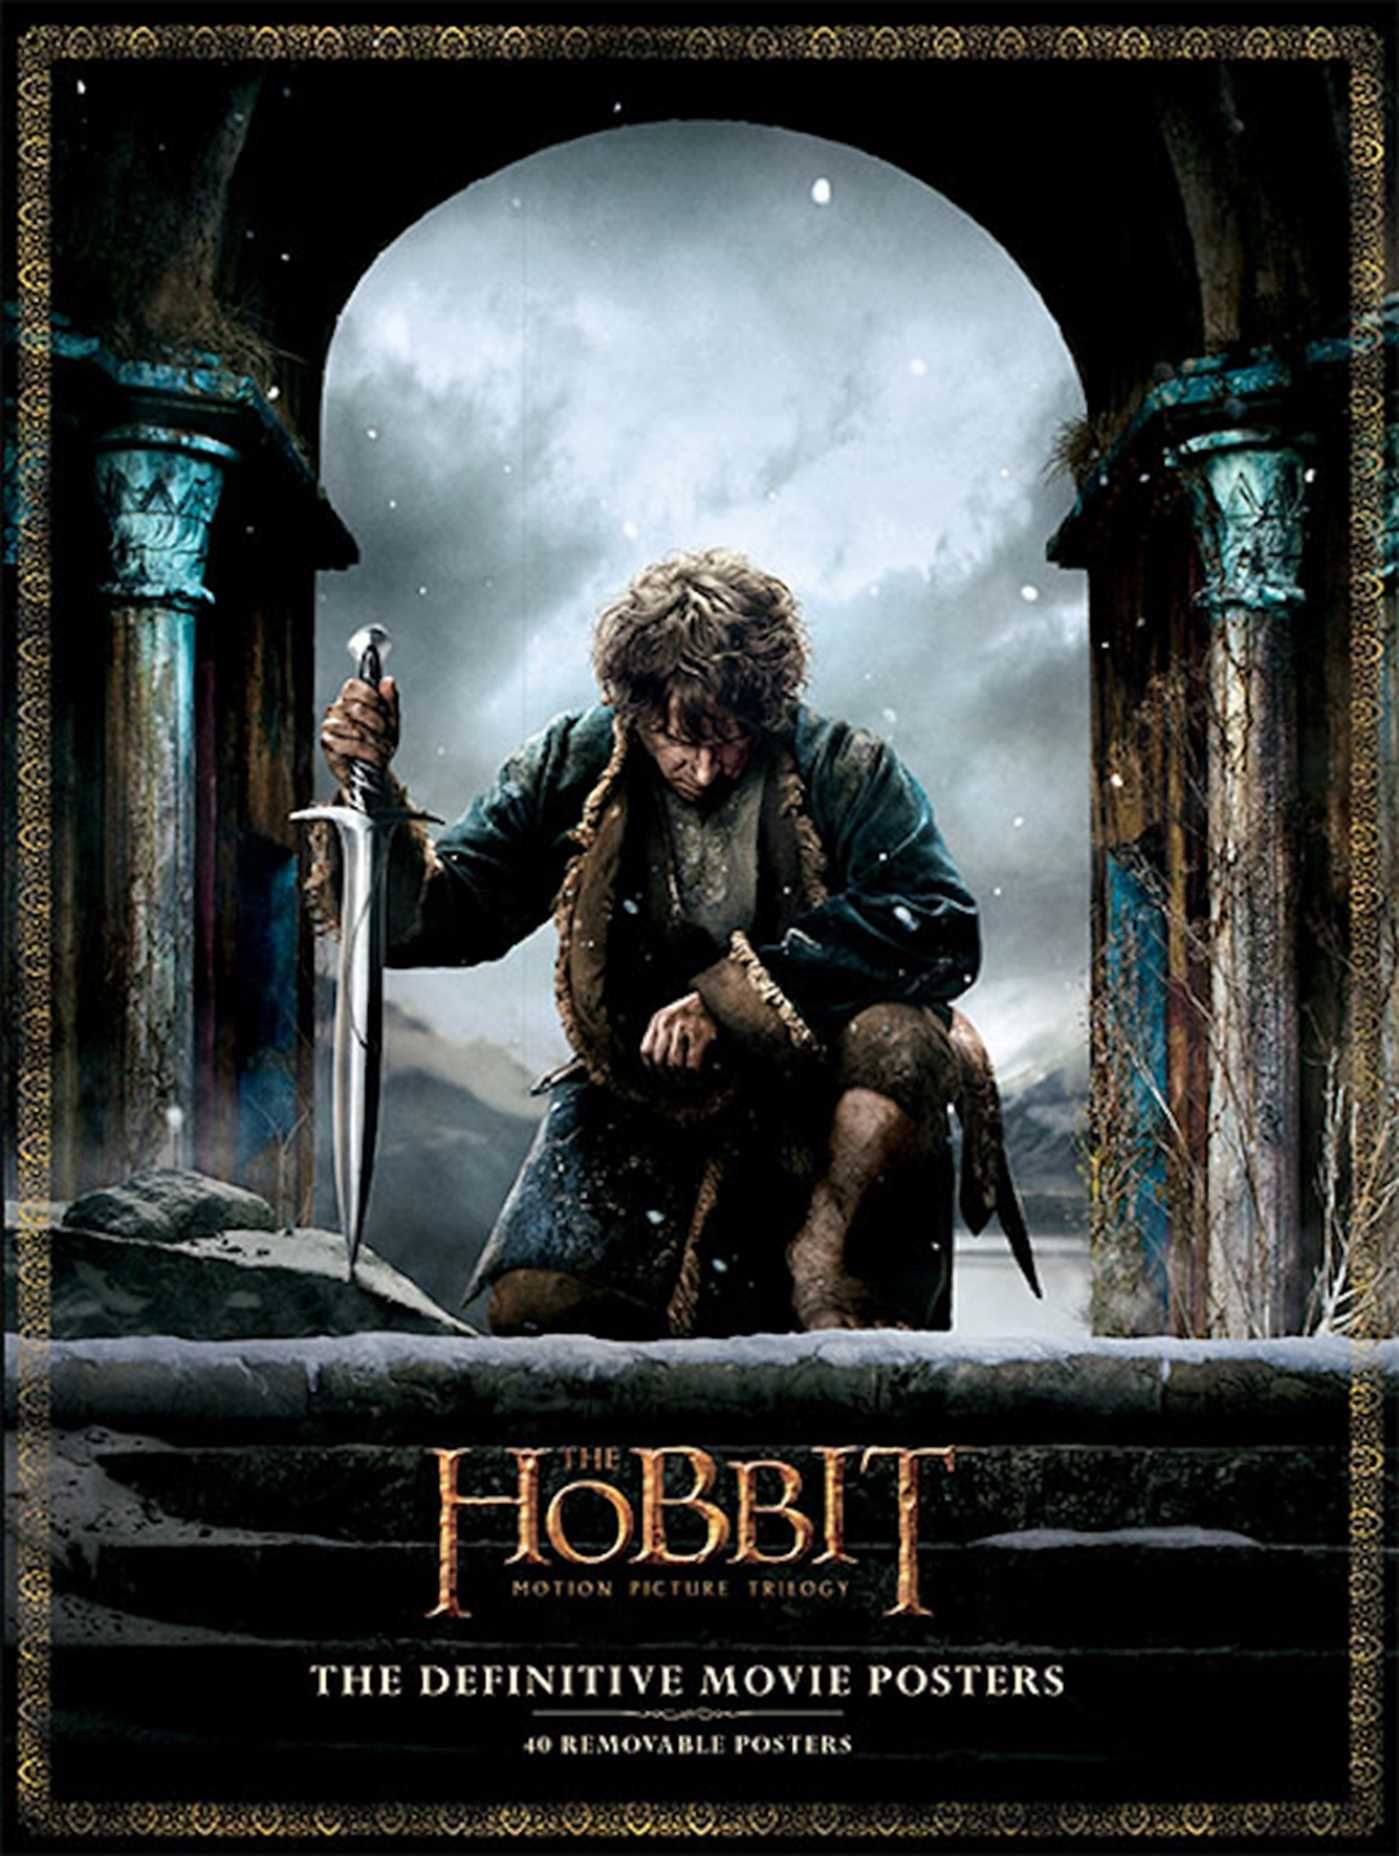  The Hobbit : The Definitive Movie Posters_NEW LINE CINEMA_9781608873869_Insight Editions 